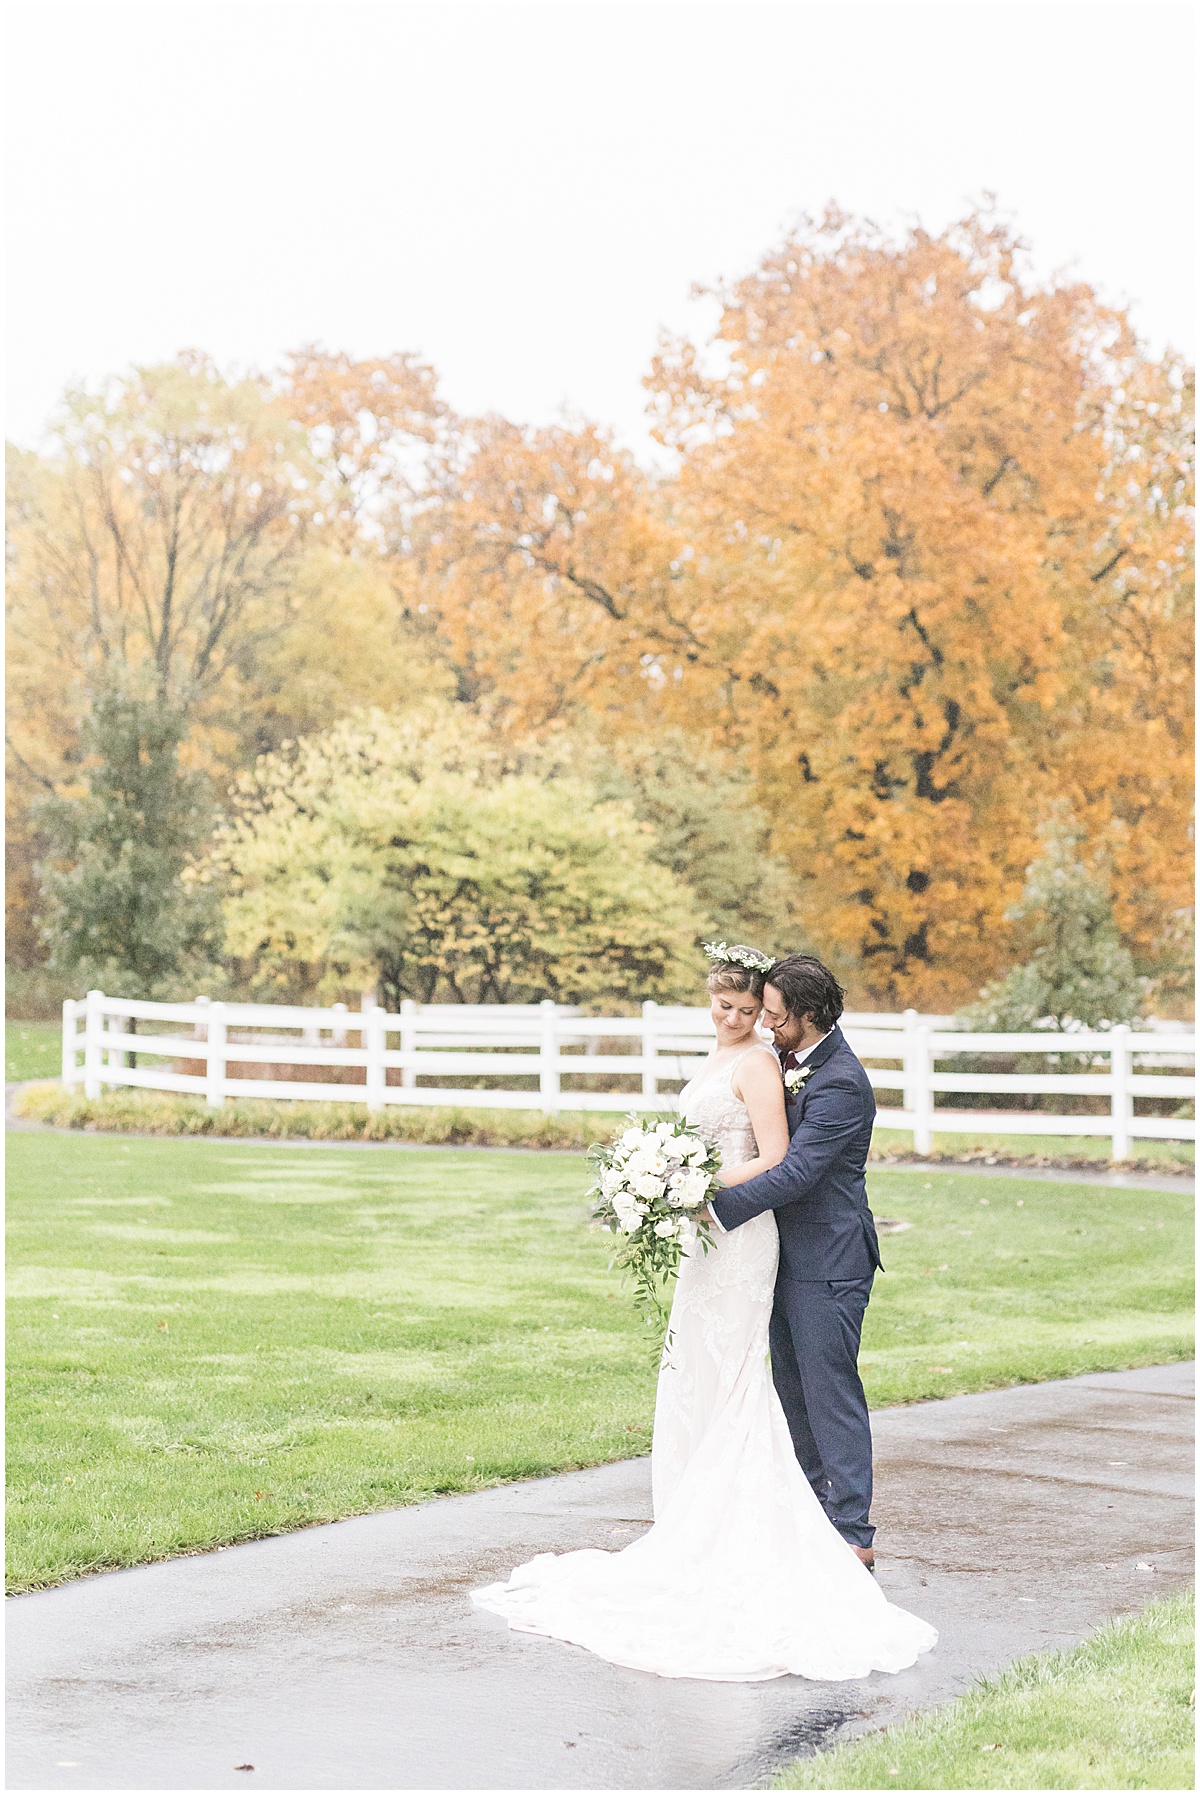 Bride and groom at Danada House wedding in Wheaton, Illinois photographed by Indiana wedding photographer Victoria Rayburn